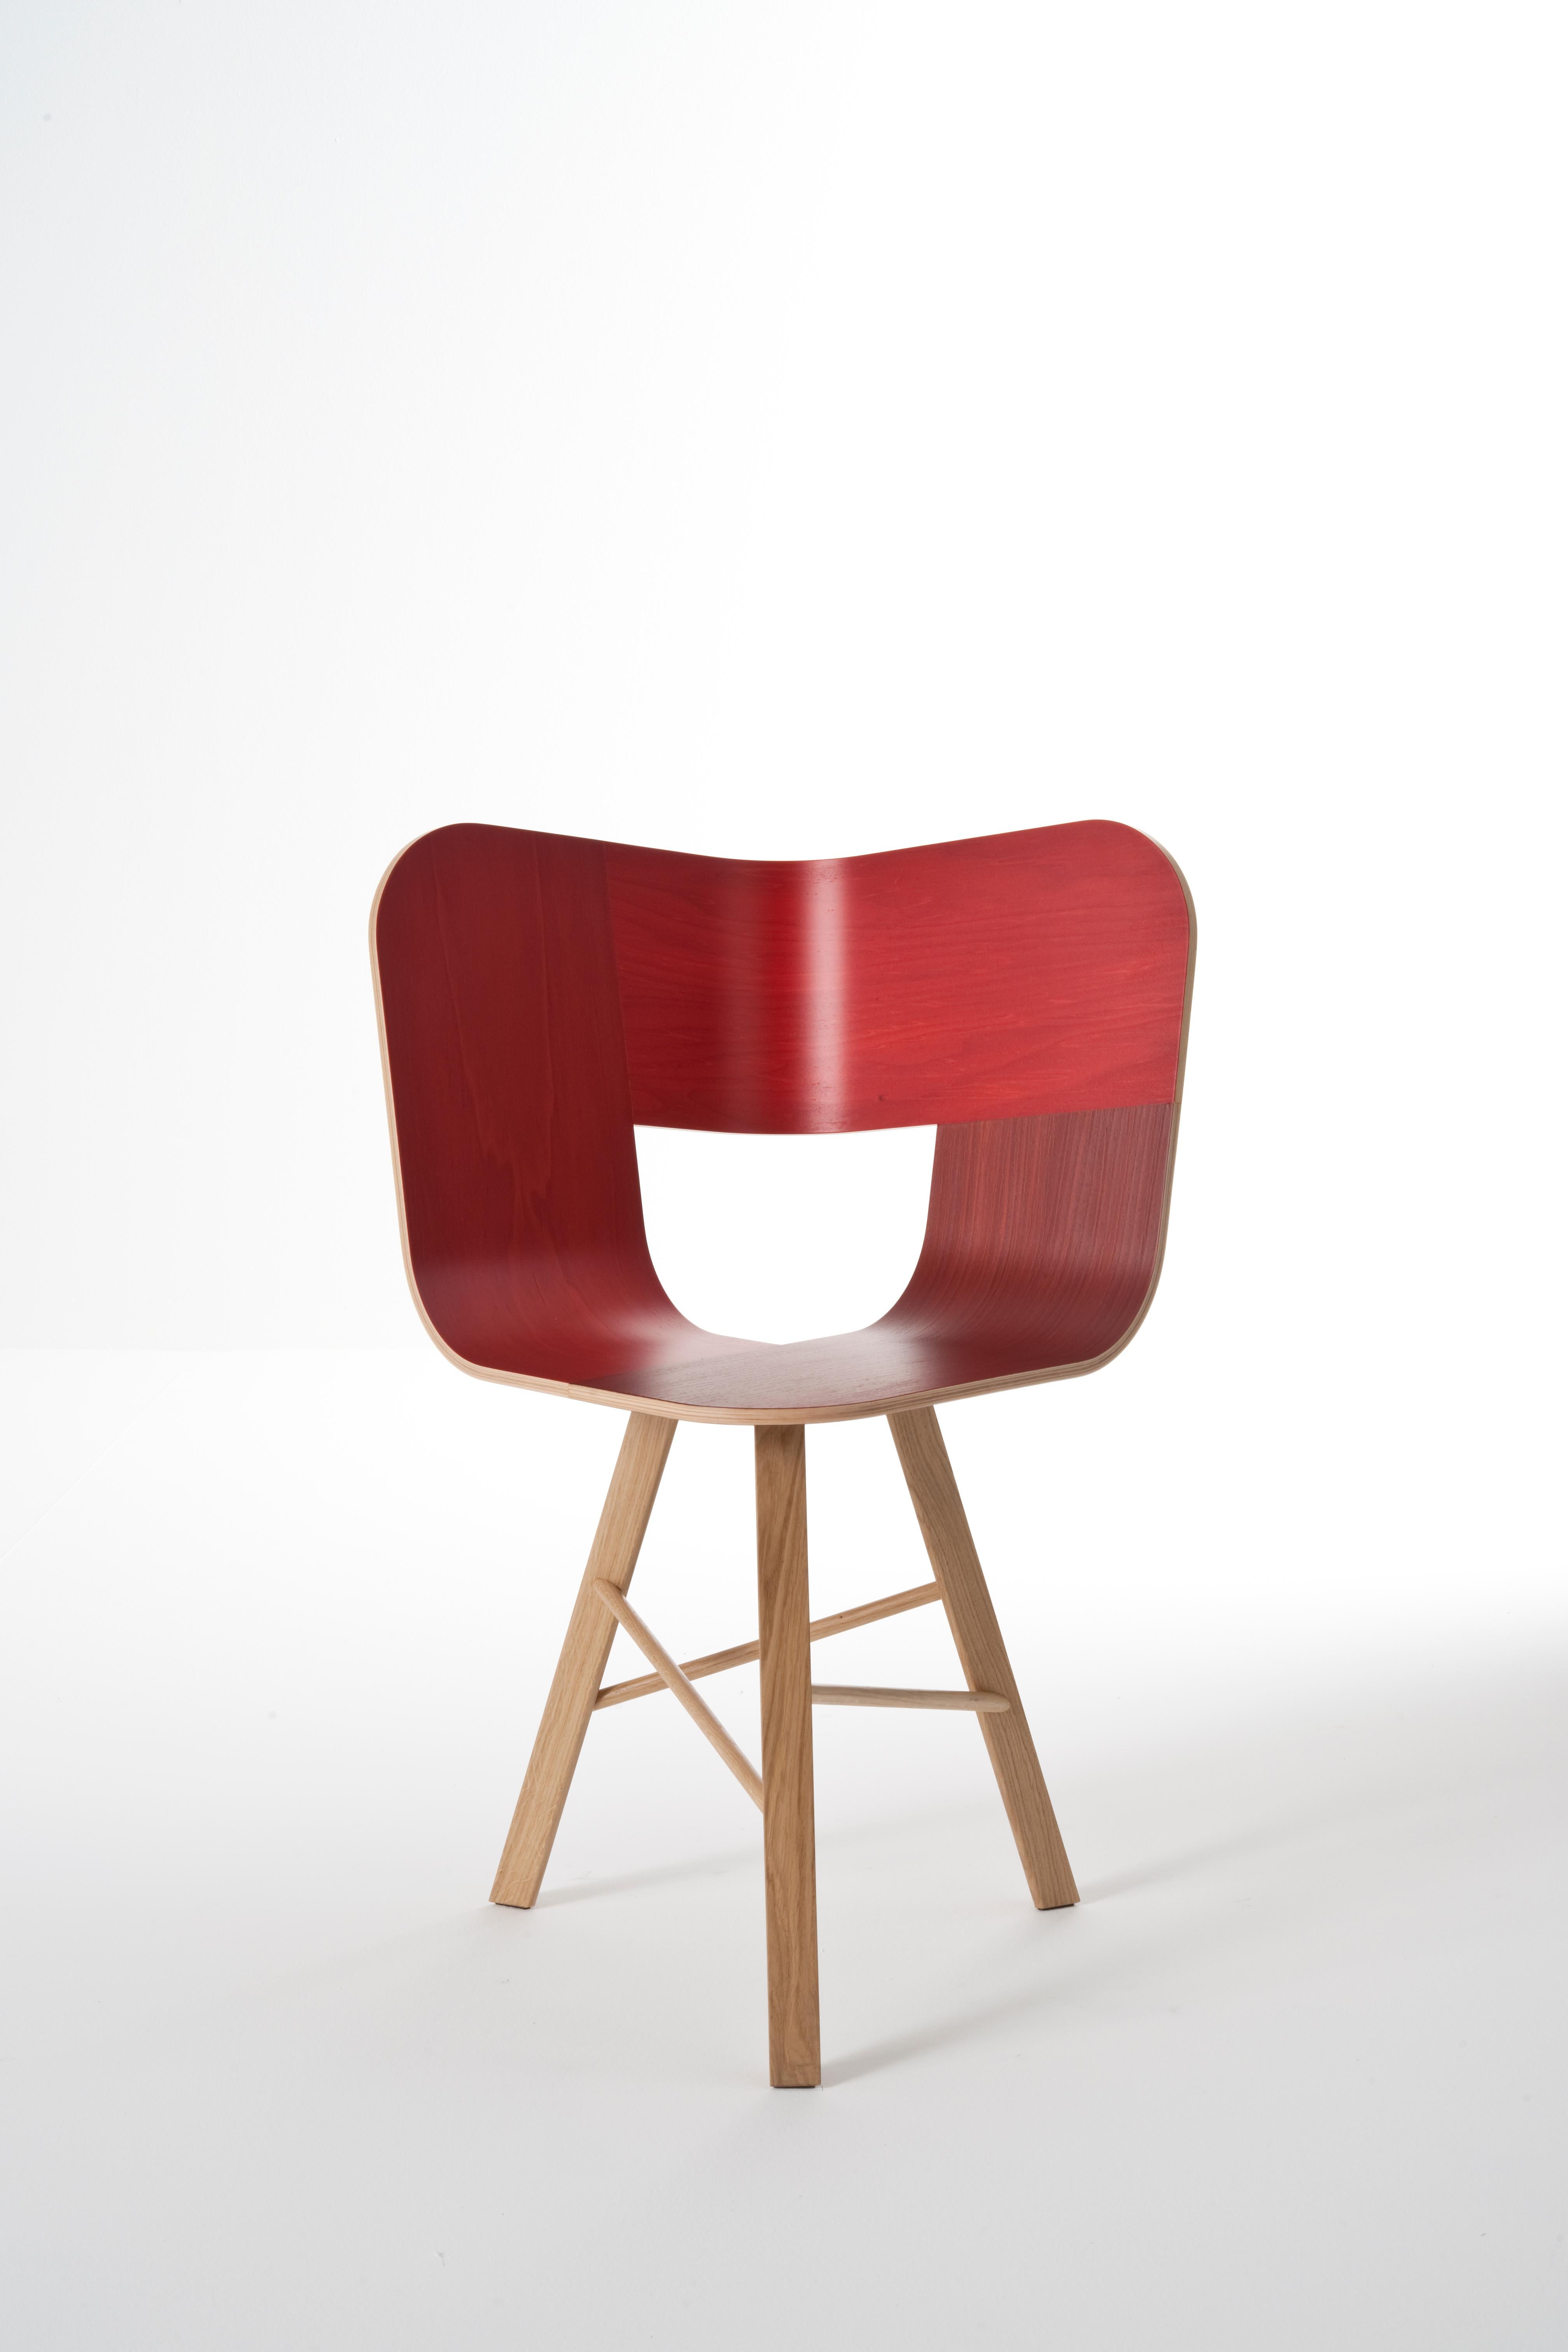 Tria wood 3 legs chair, red by Colé Italia with Lorenz & Kaz
(RAL color seat - RAL color painted legs)
Dimensions: H 82.5, D 52, W 61 cm
Materials: plywood chair; 3 legs solid oak base

Also available: Tria; 4 legs, with cushion, black, gold,